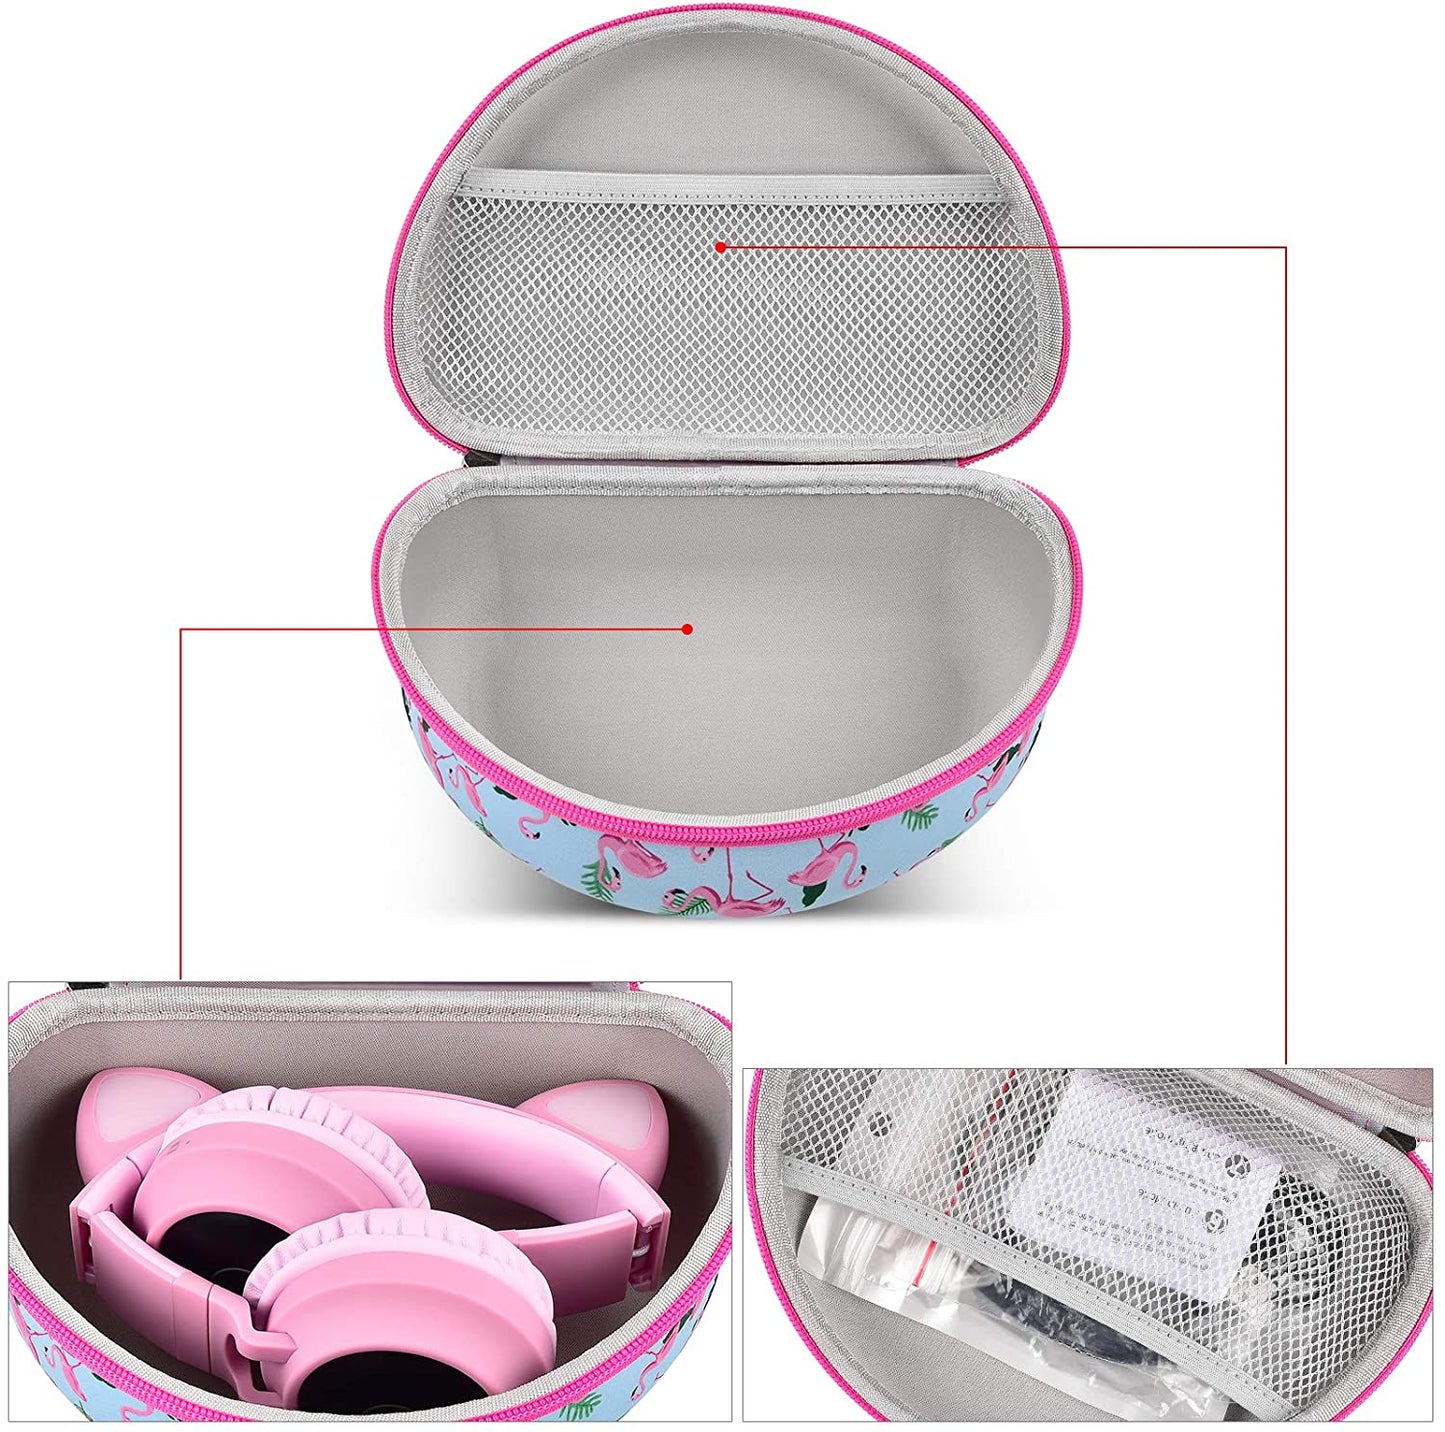 Headphone Case Comatible for Riwbox CT-7 Pink& Green 3.5mm Jack CT-7S Cat iClever IC-HS01 Mpow BH297B Wired and Picun Bluetooth Wireless Over-Ear Headphones Headset for Kids